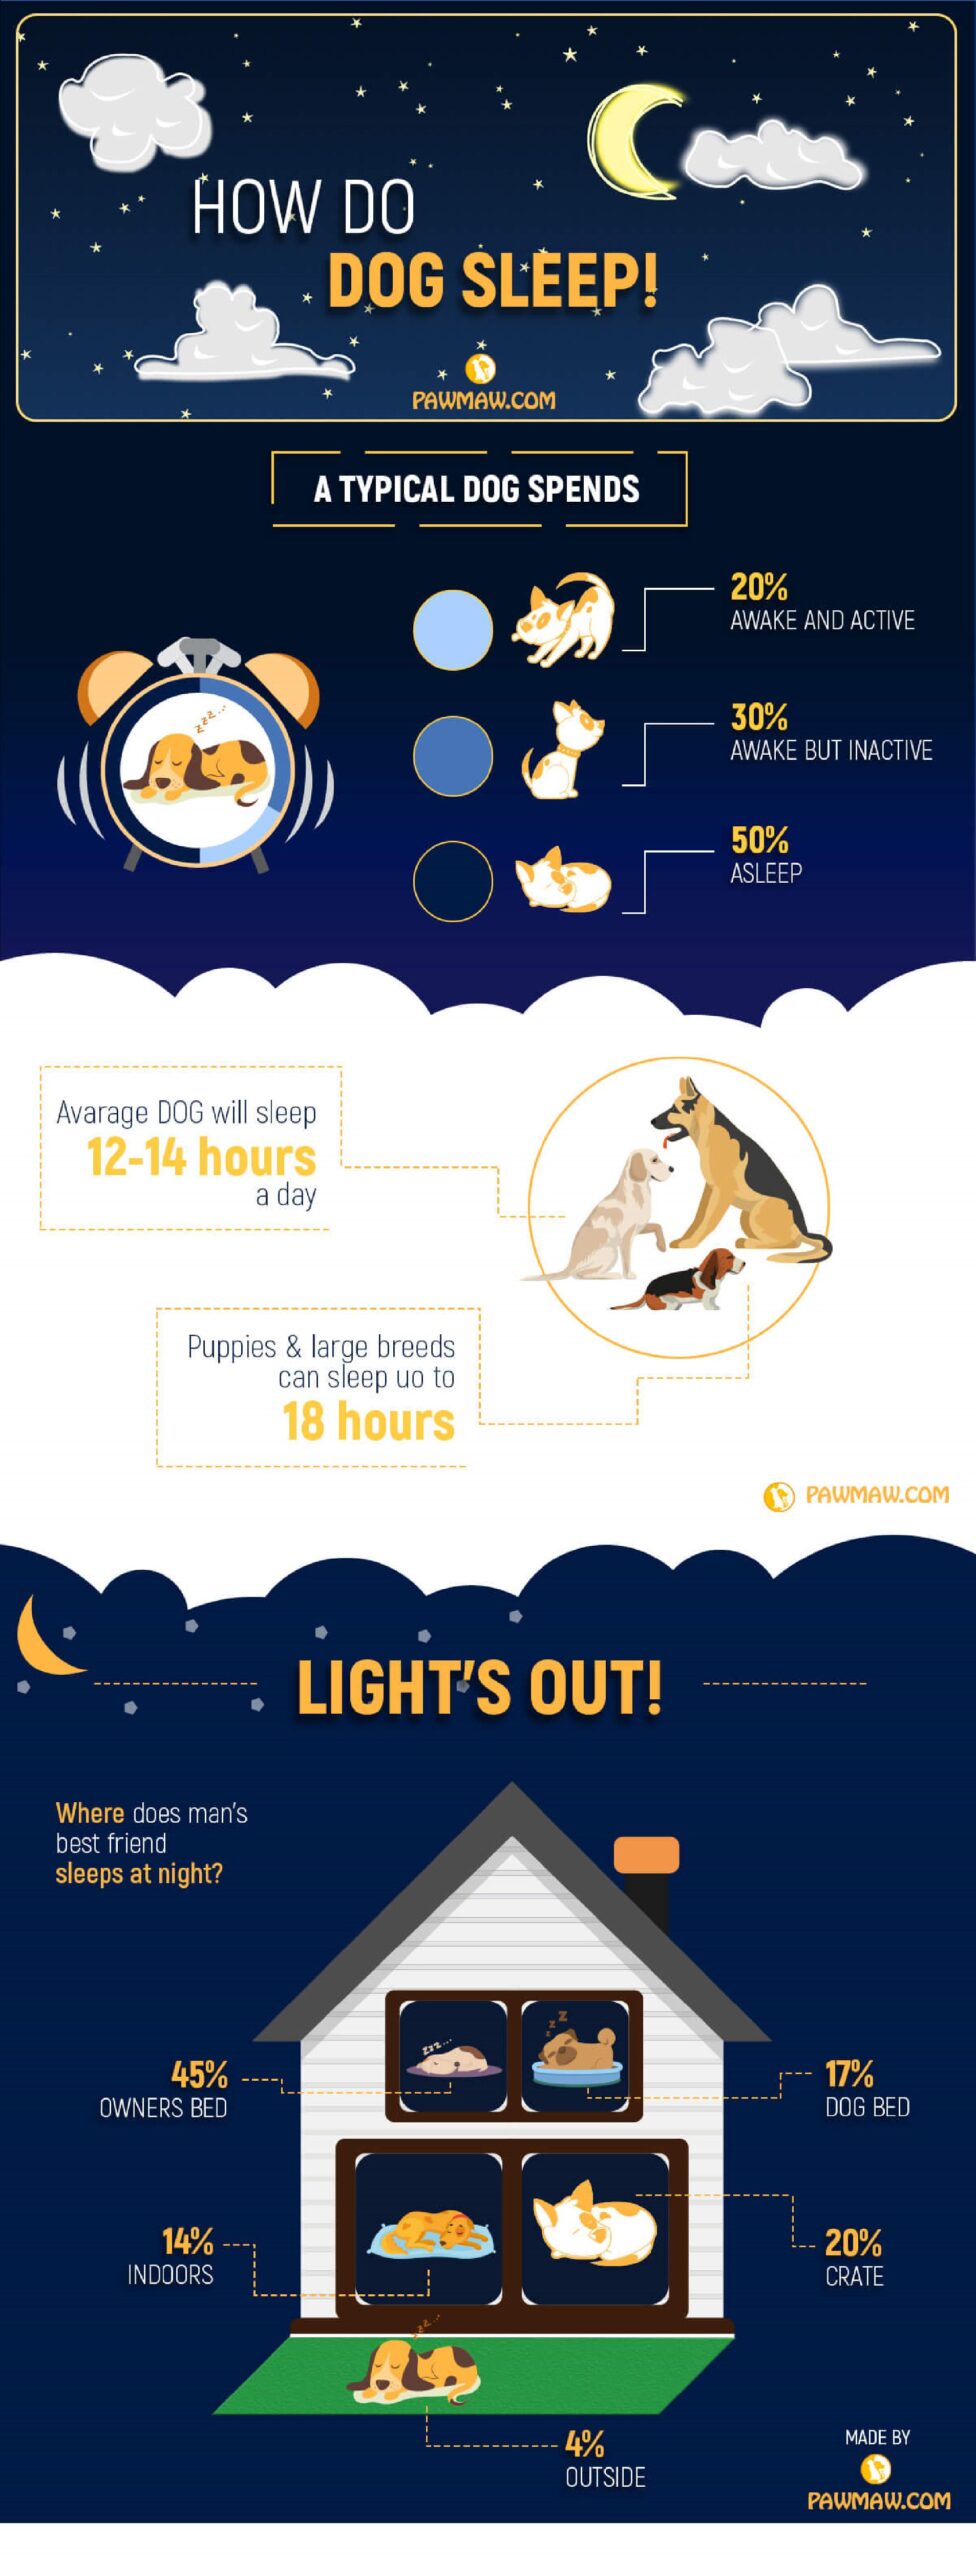 why do dogs sleep so much infographic1